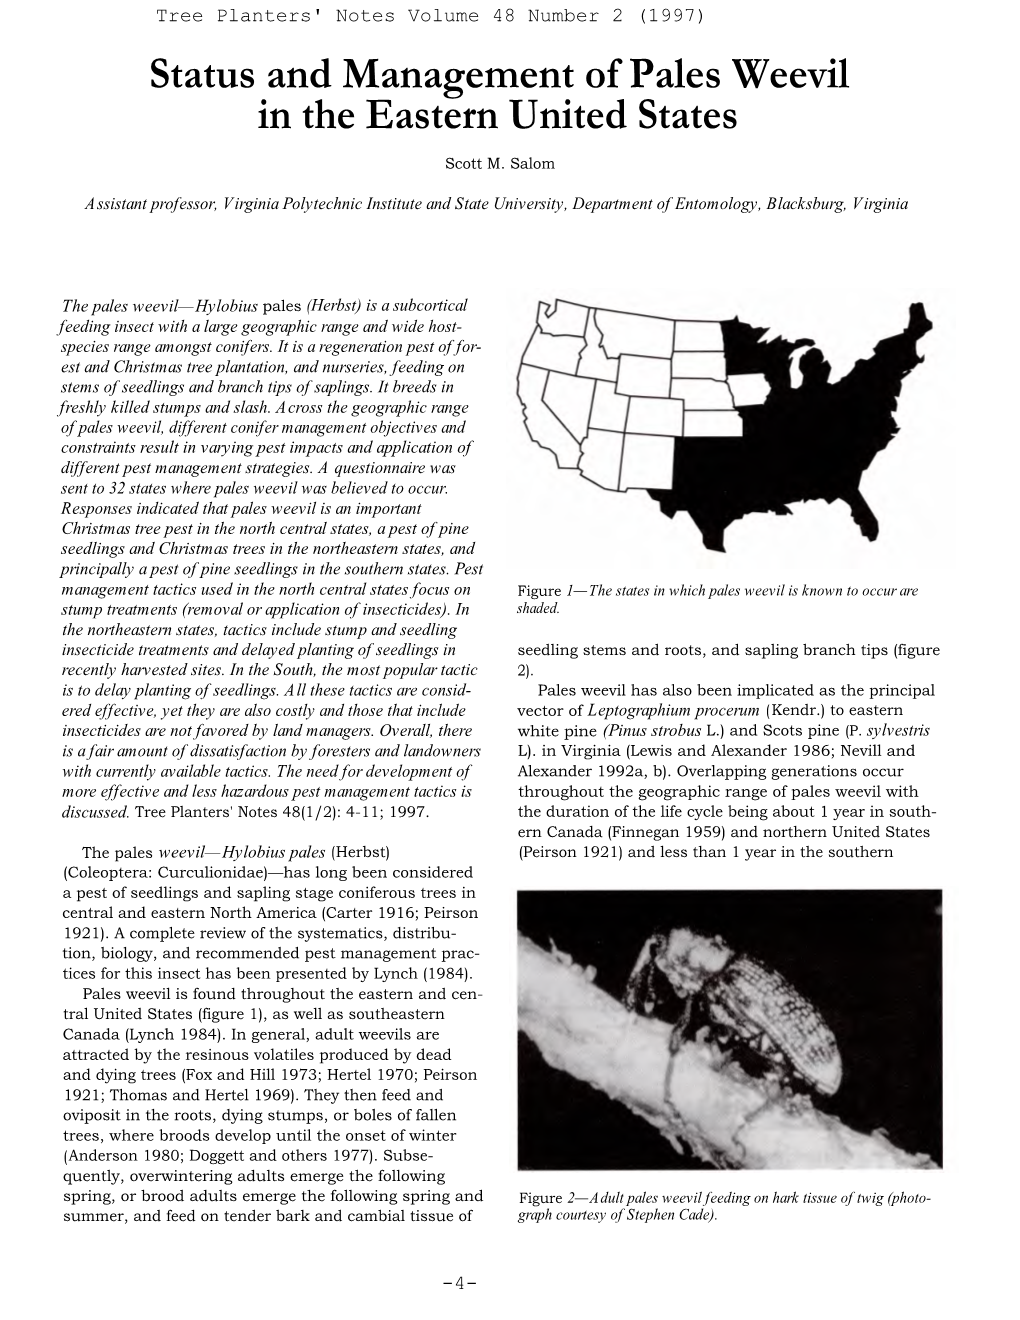 Status and Management of Pales Weevil in the Eastern United States